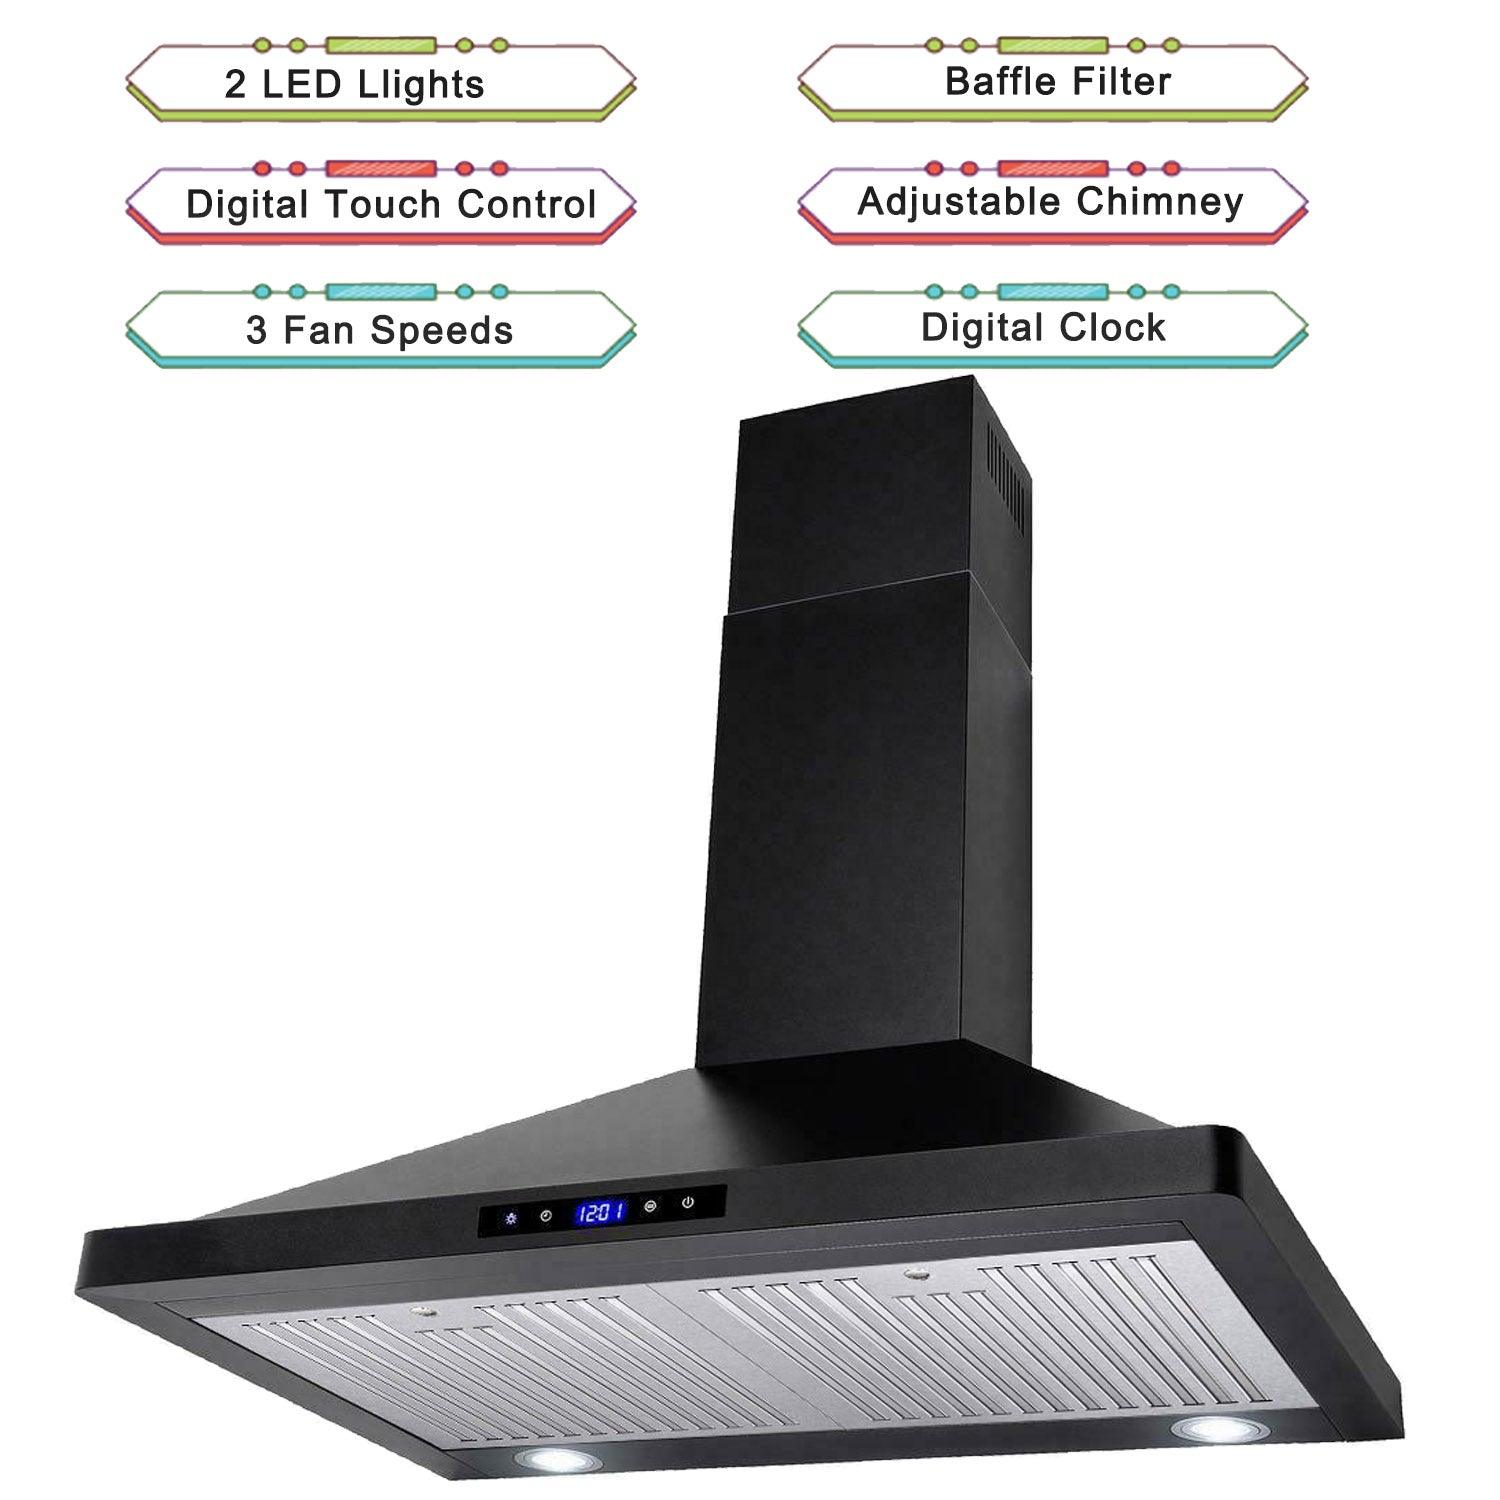 Tieasy 24 inch Wall Mount Range Hood 450 CFM Ducted/Ductless with 3 Speed Exhaust Fan - ZMG-0160B